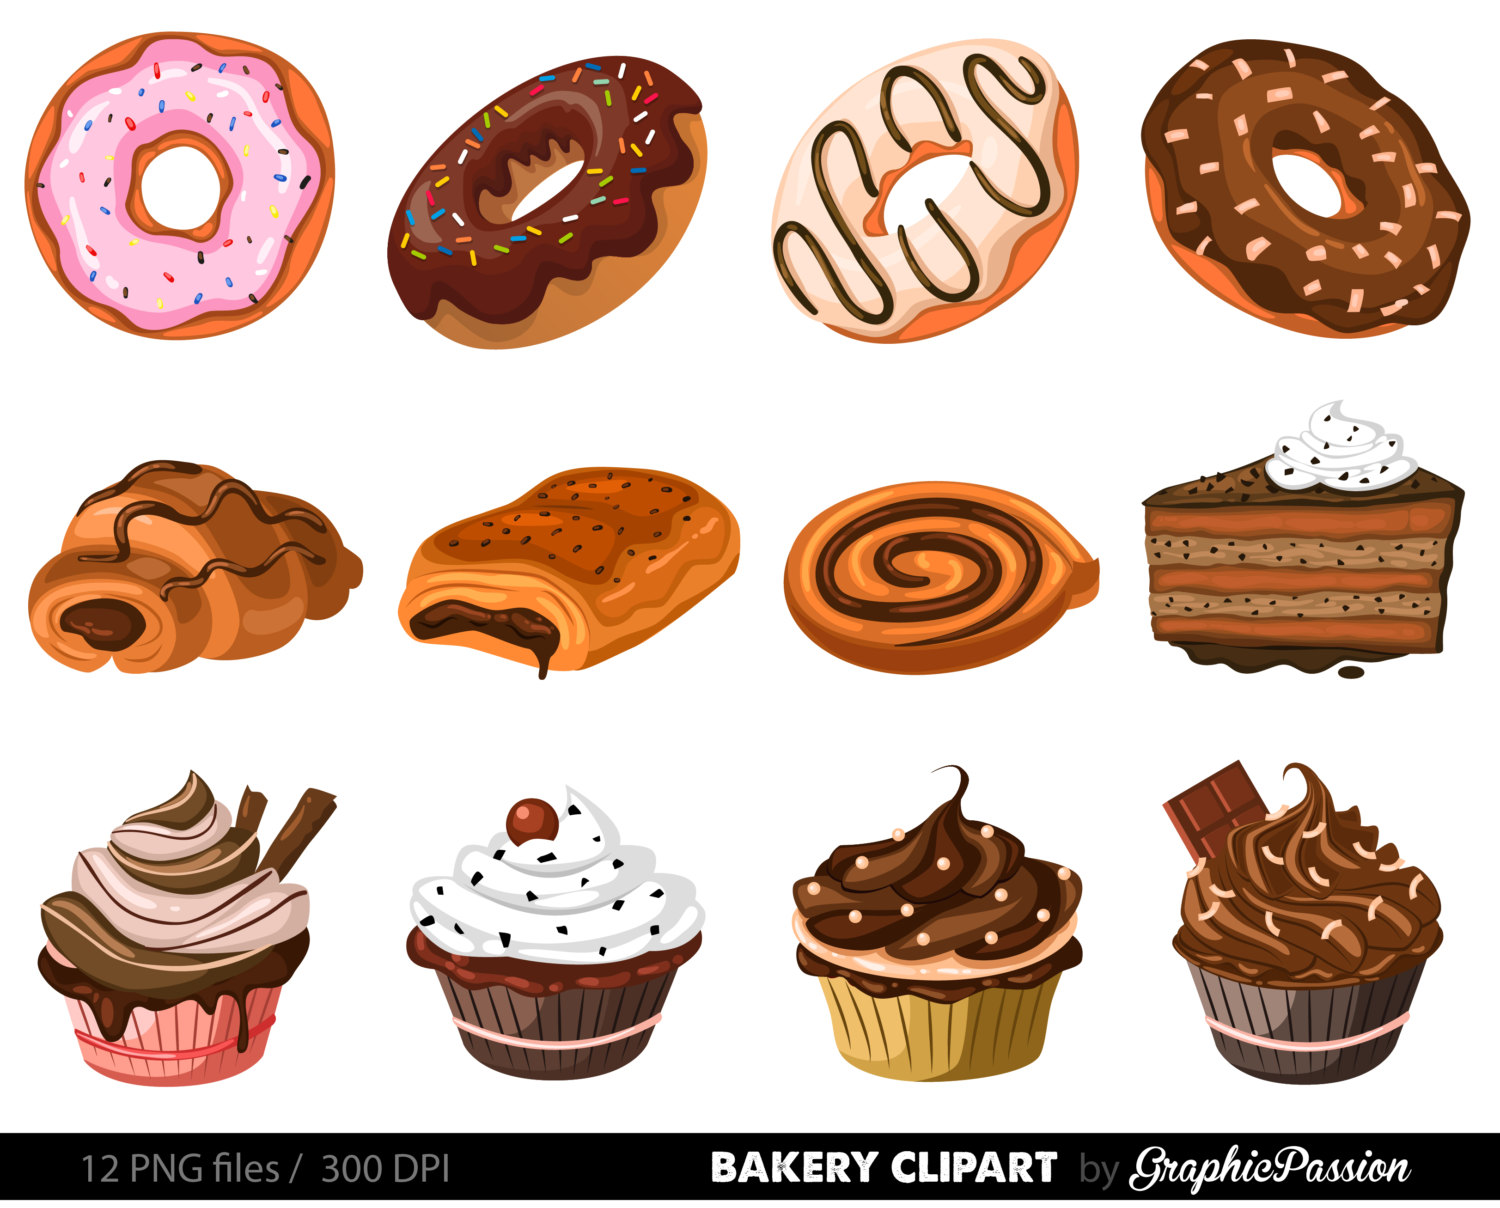 Pastry Clipart Images - Free Download on Freepik